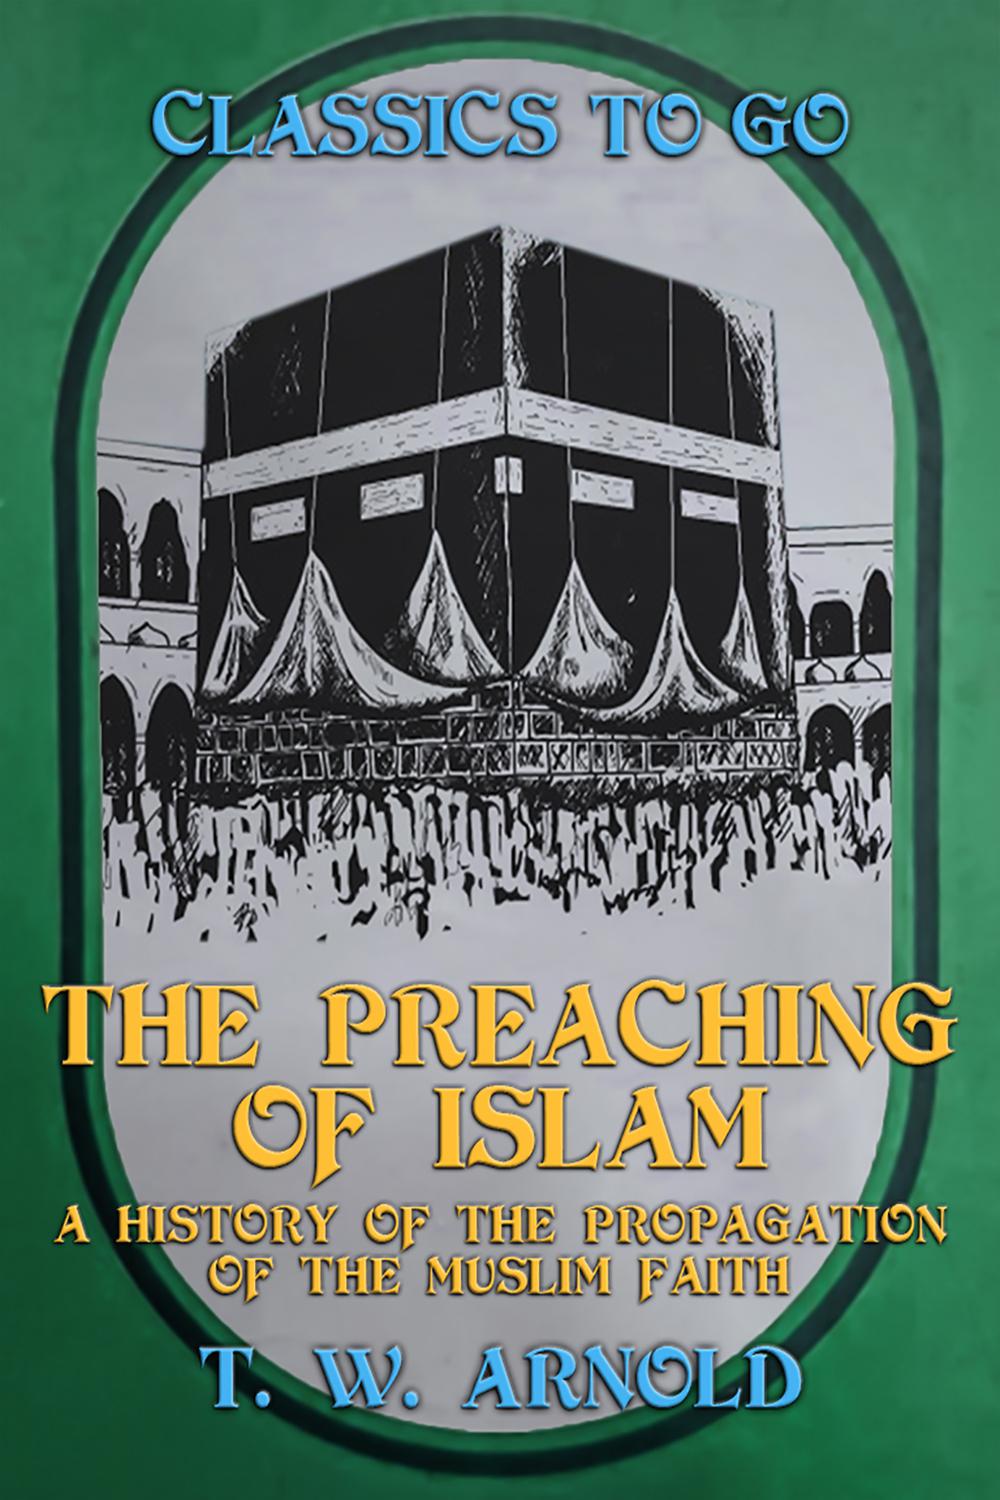 The Preaching of Islam A History of the Propagation of the Muslim Faith - T. W. Arnold,,